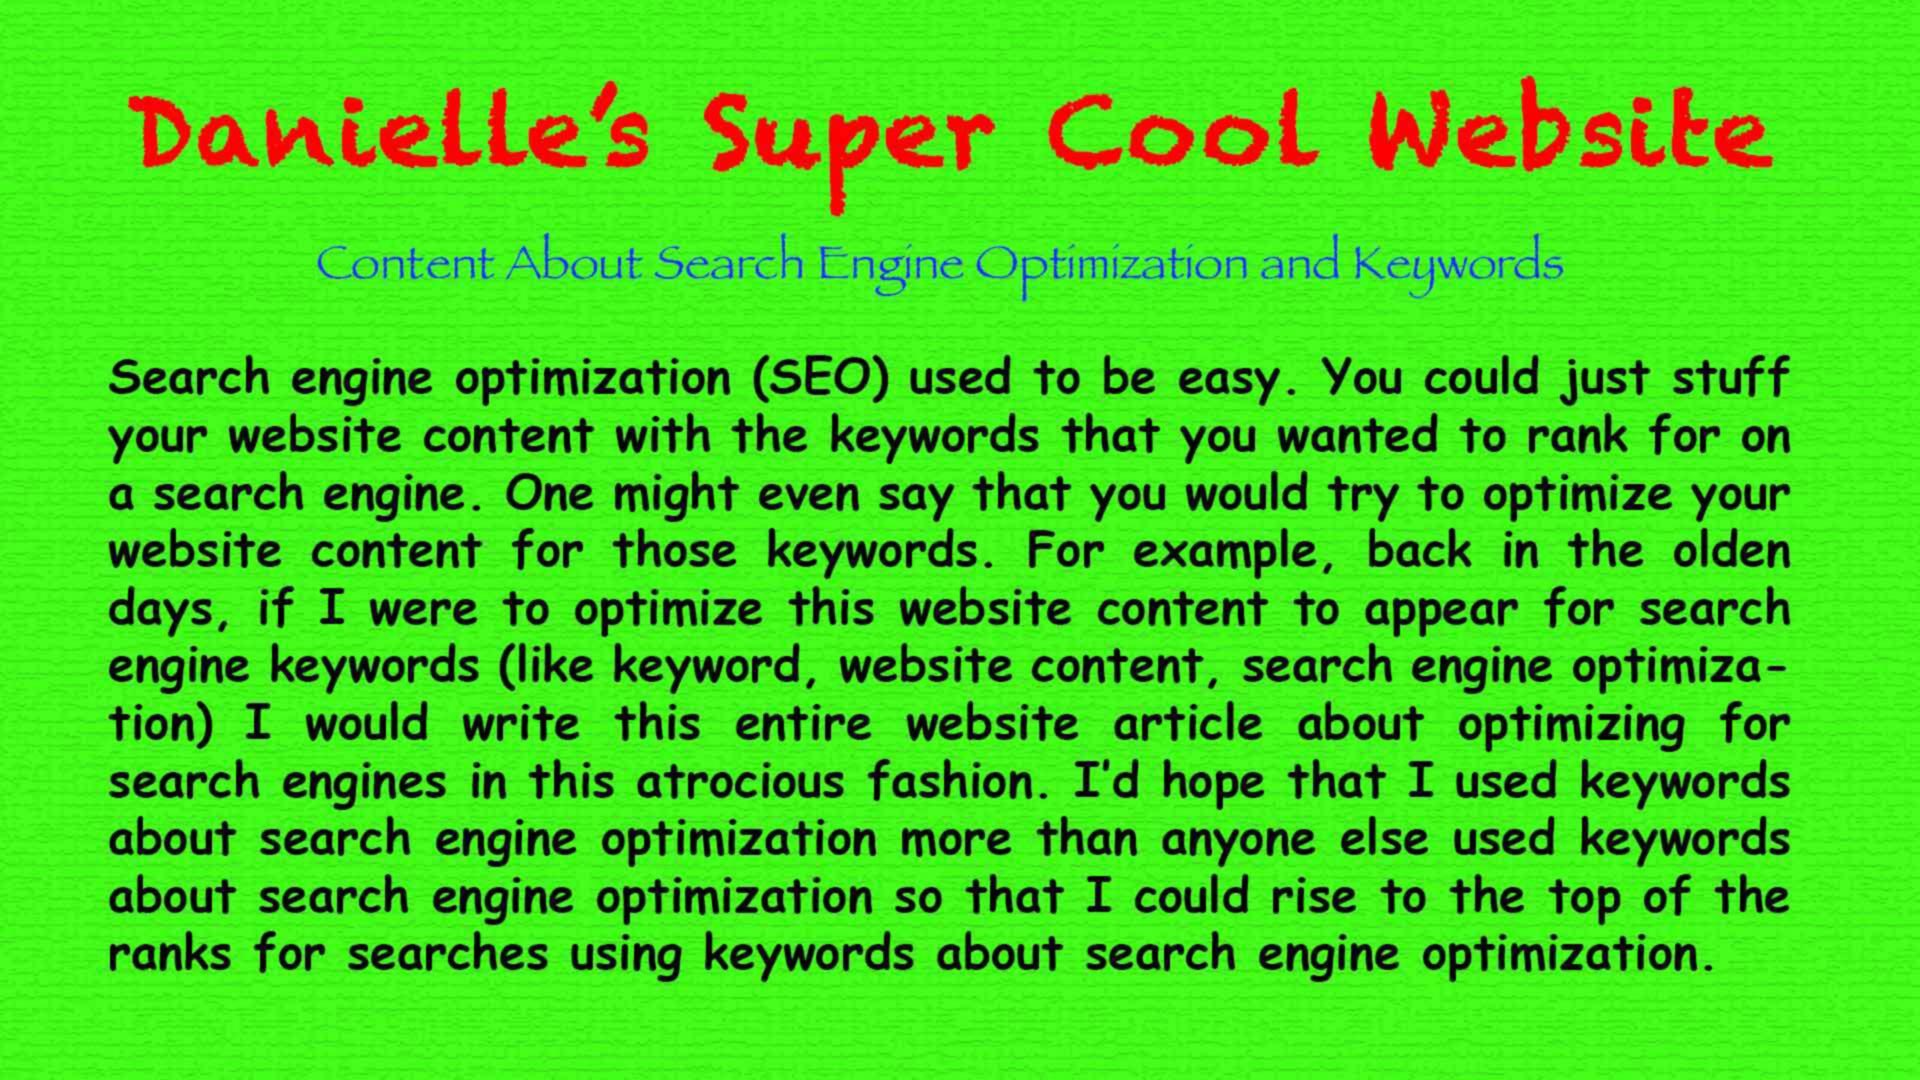 Example of doing it wrong: Comic sans font on lime green background that repeatedly uses the phrases "search engine optimization" and "keywords"